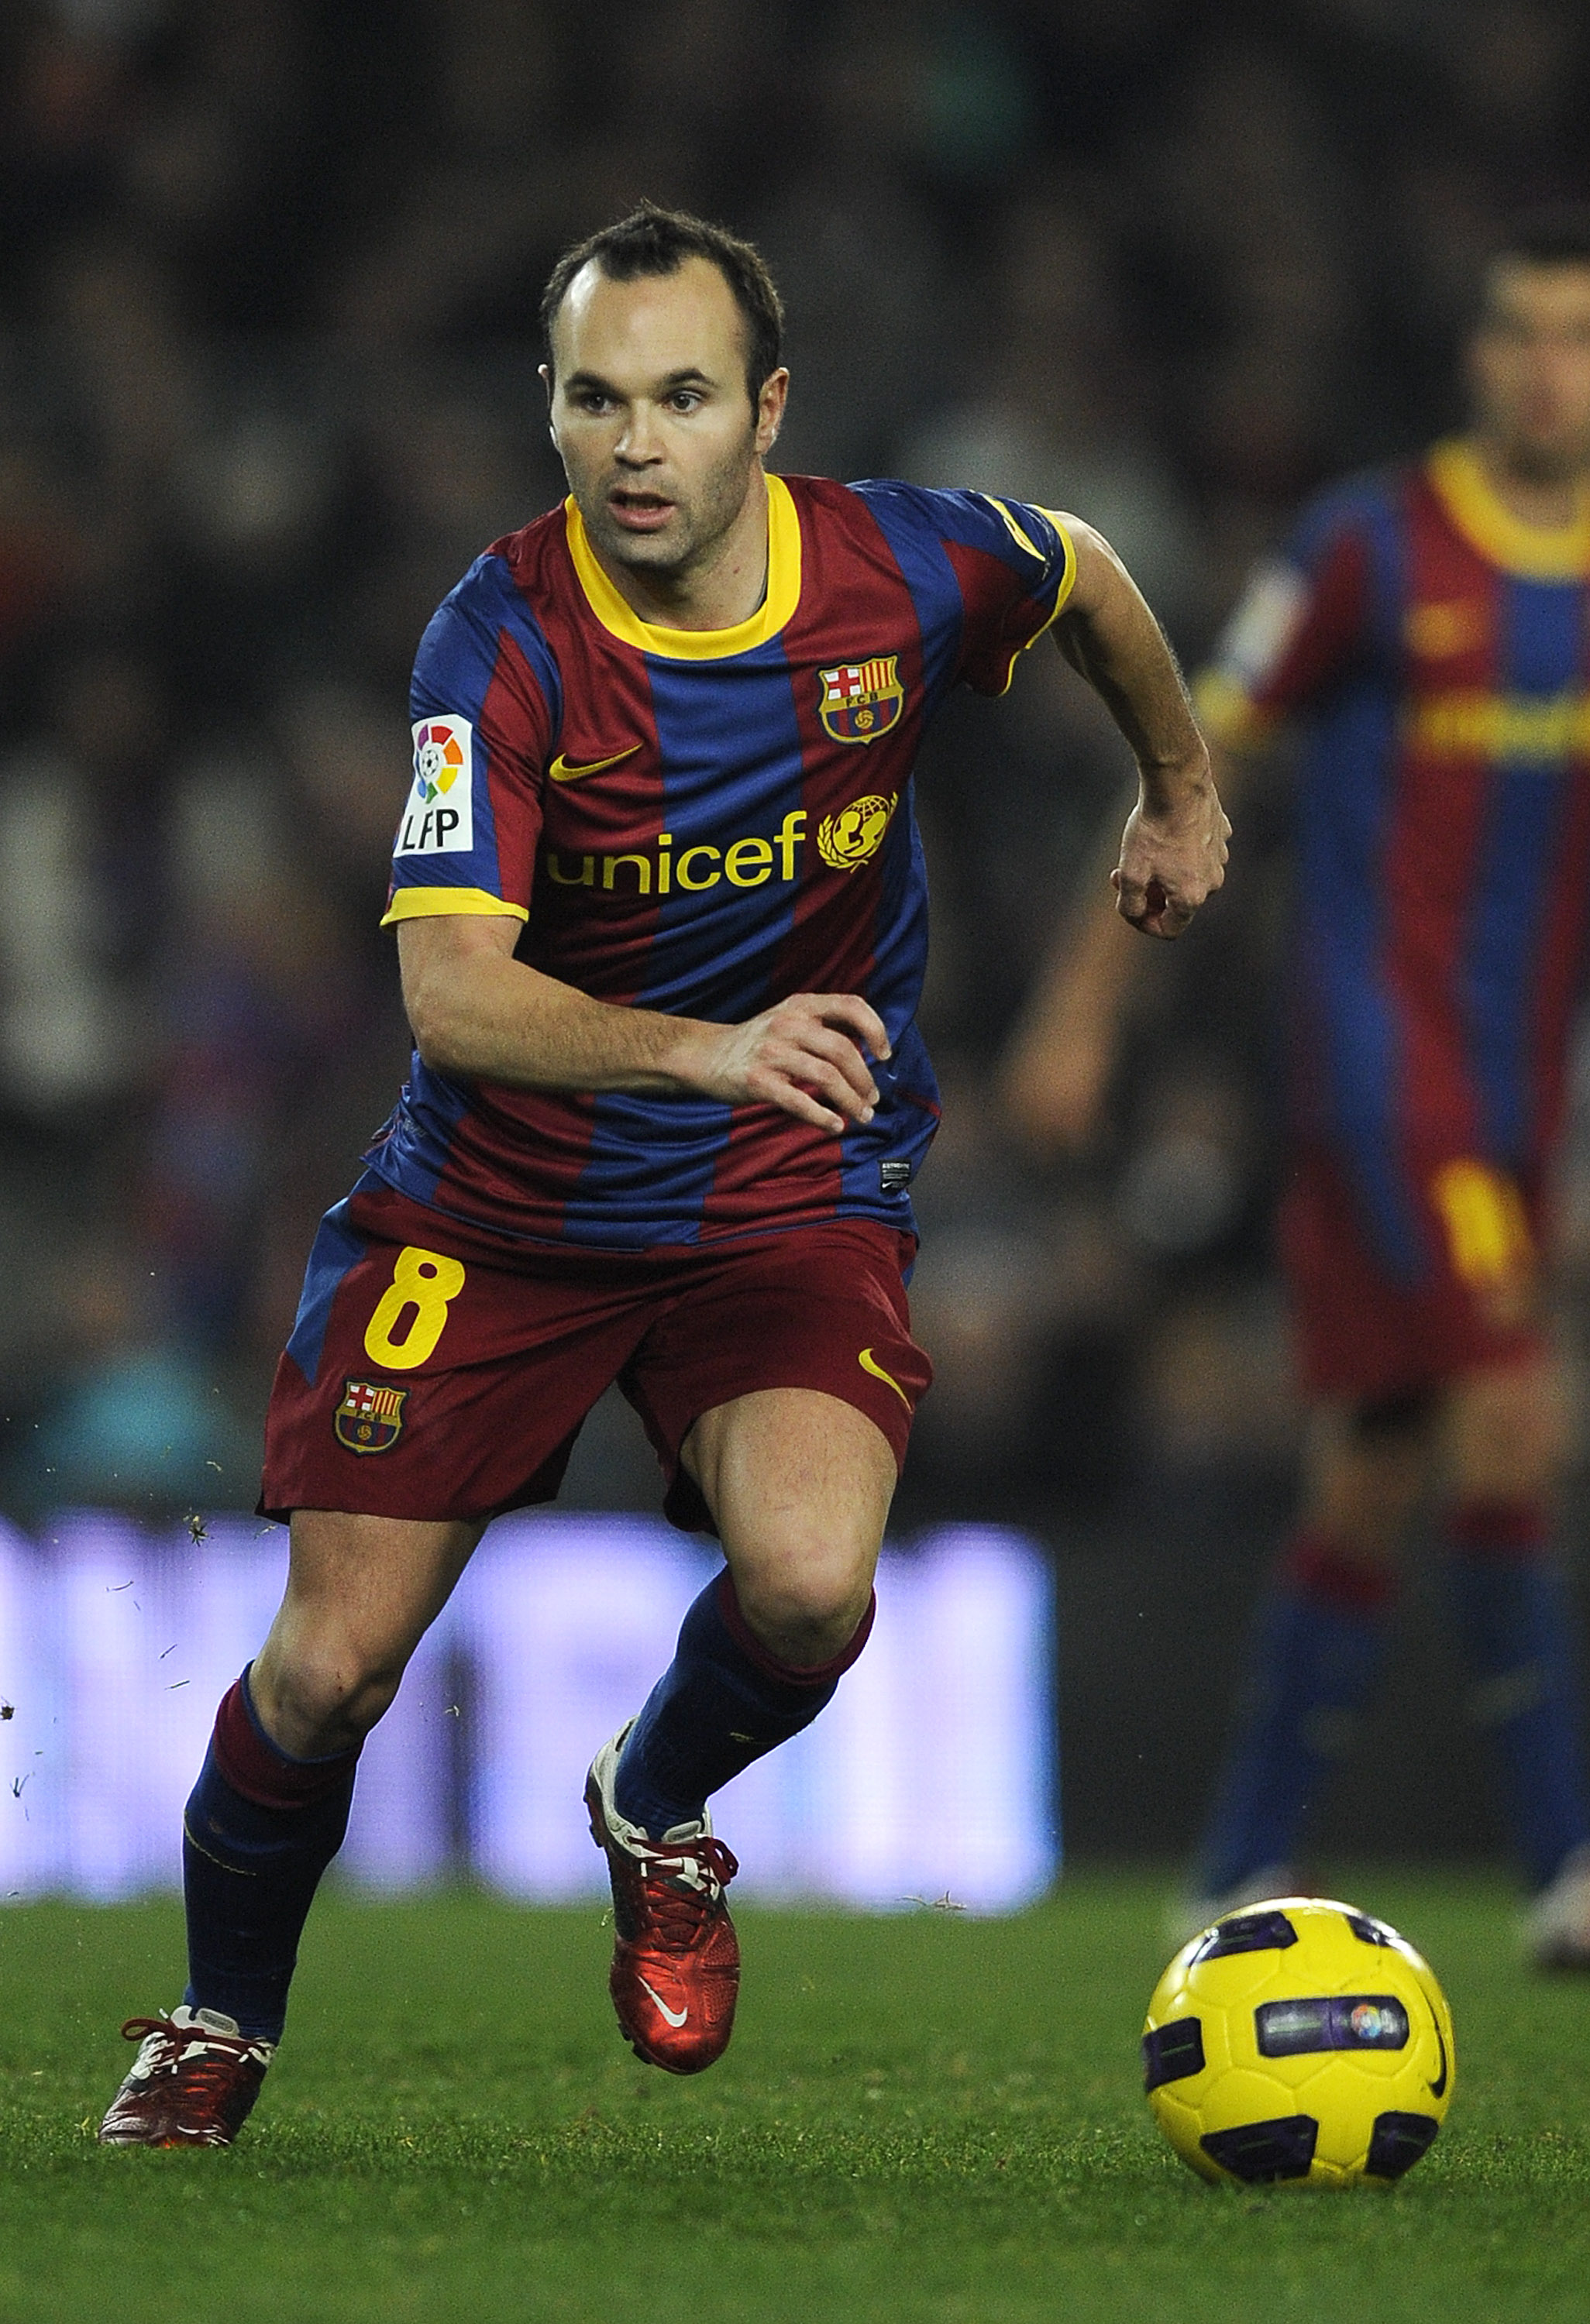 BARCELONA, SPAIN - JANUARY 02:  Andres Iniesta of Barcelona runs with the ball during the La Liga match between Barcelona and Levante UD at Camp Nou on January 2, 2011 in Barcelona, Spain. Barcelona won 2-1.  (Photo by David Ramos/Getty Images)